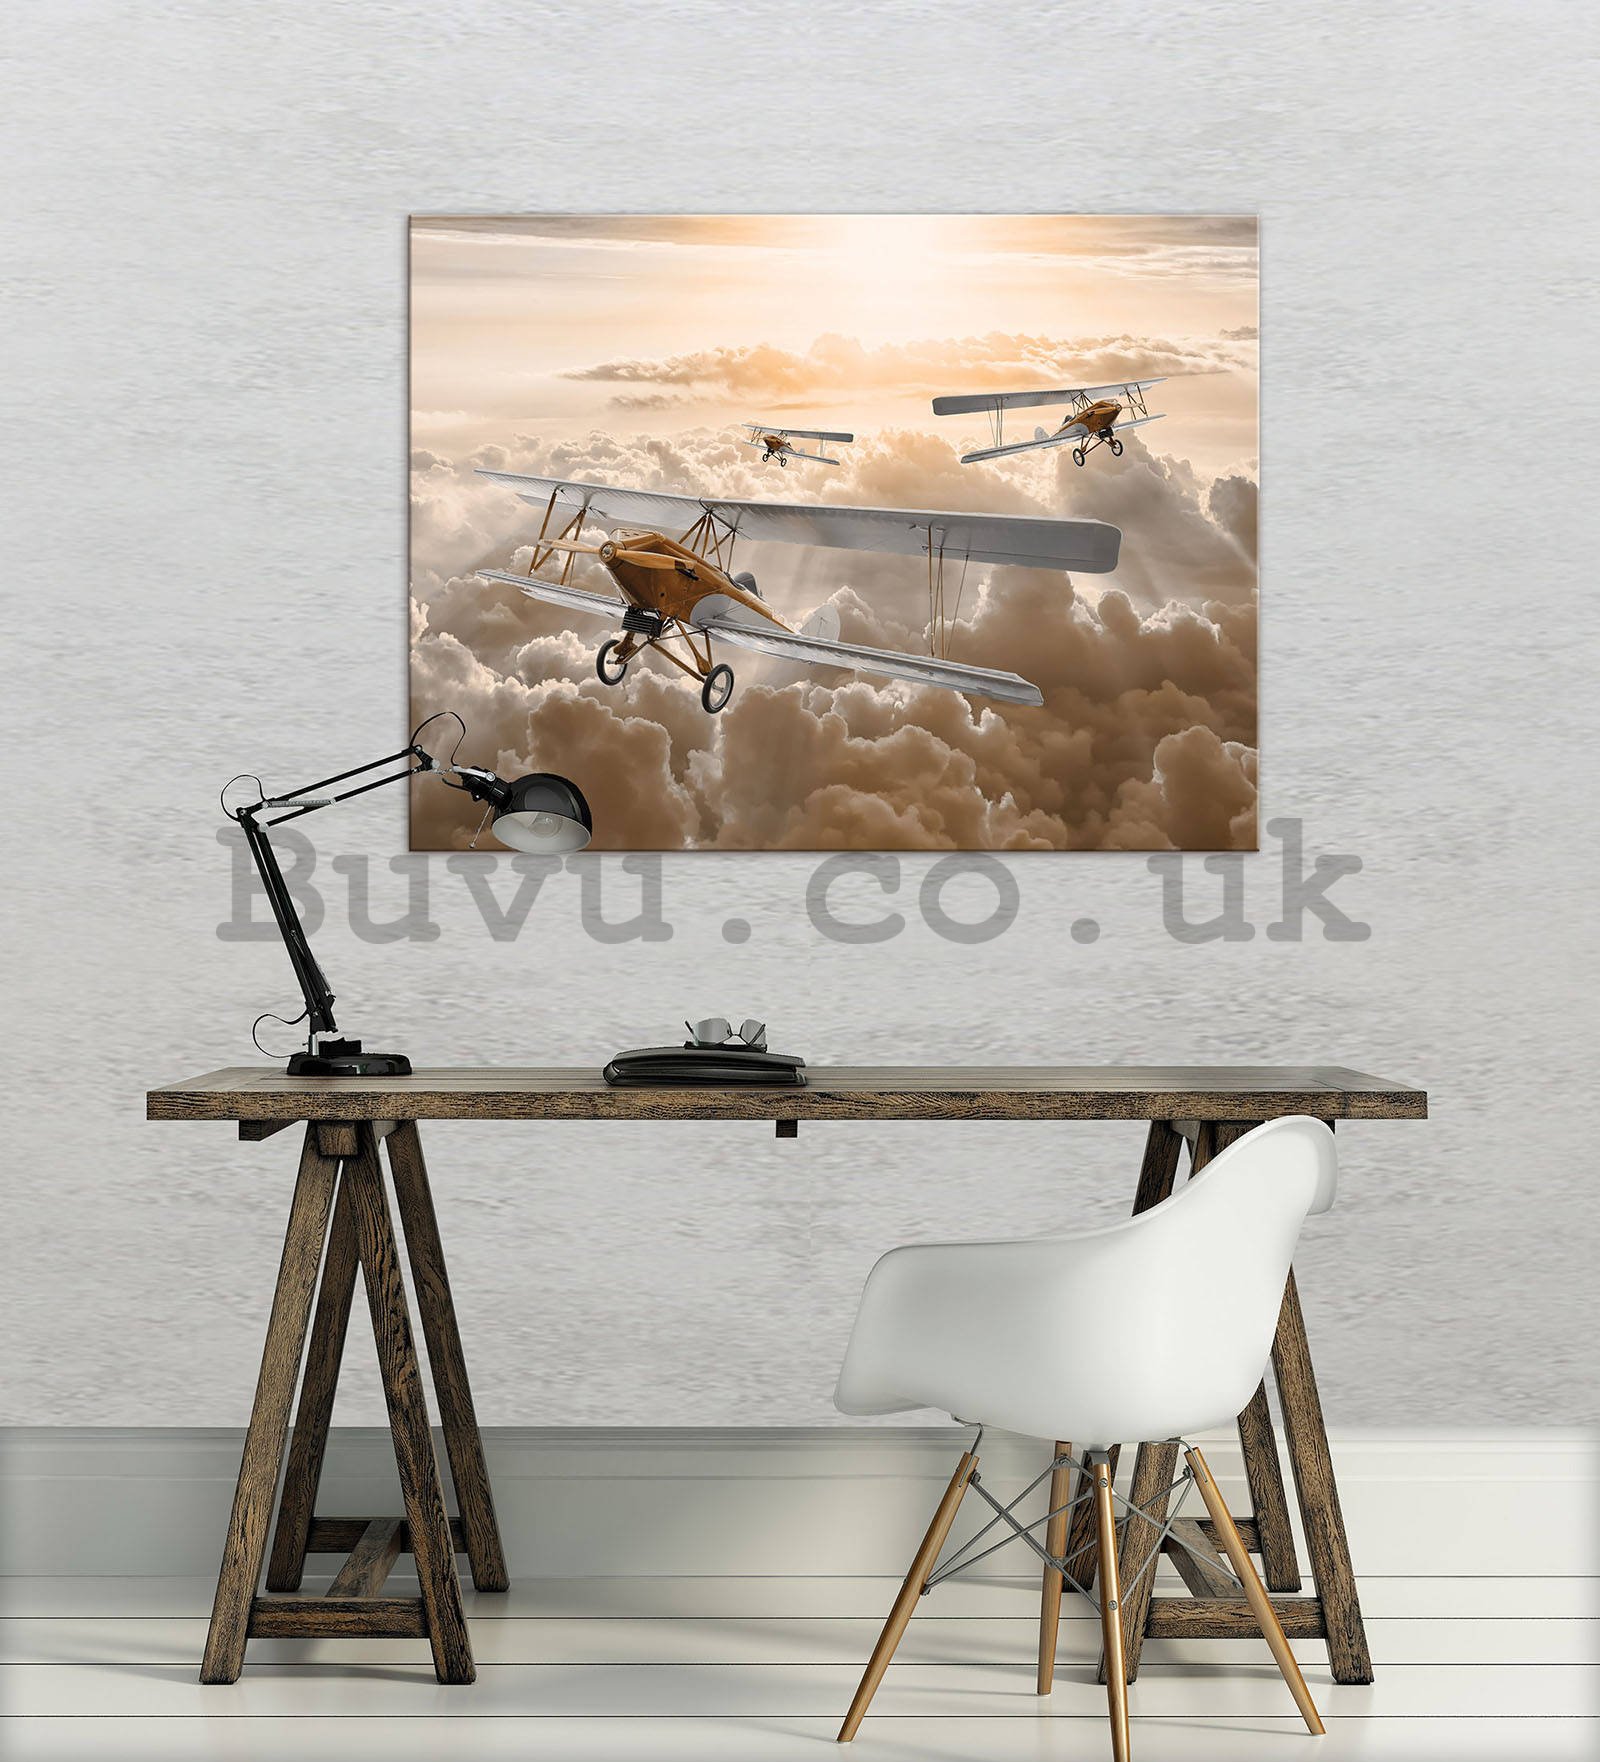 Painting on canvas: Biplanes - 80x60 cm